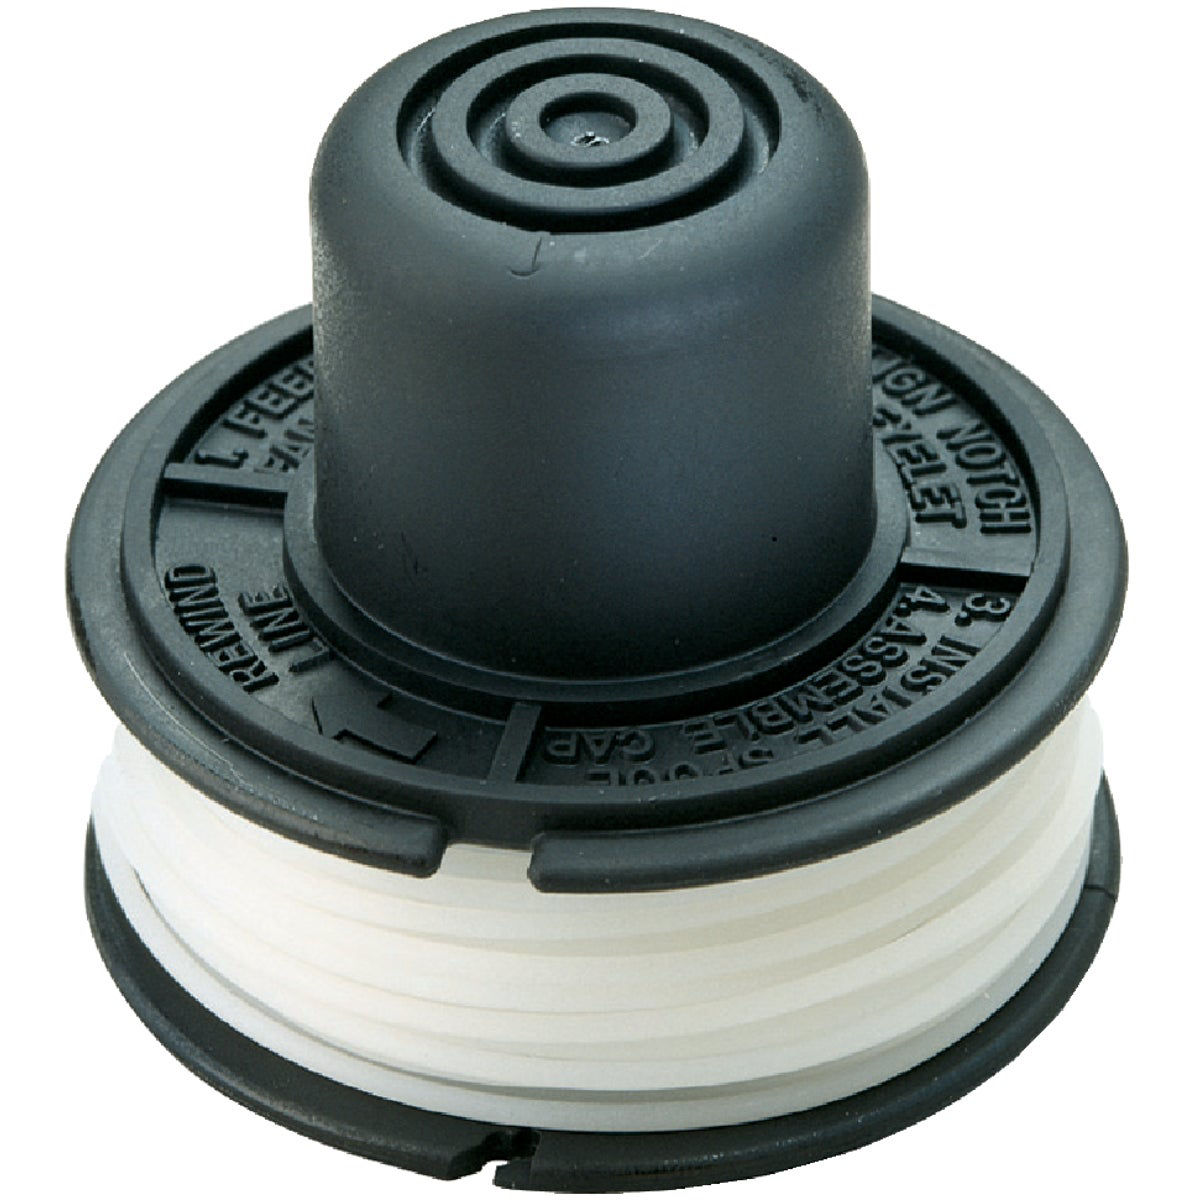 Thten RS-136 Trimmer Spool Line Compatible with Black Decker 20ft